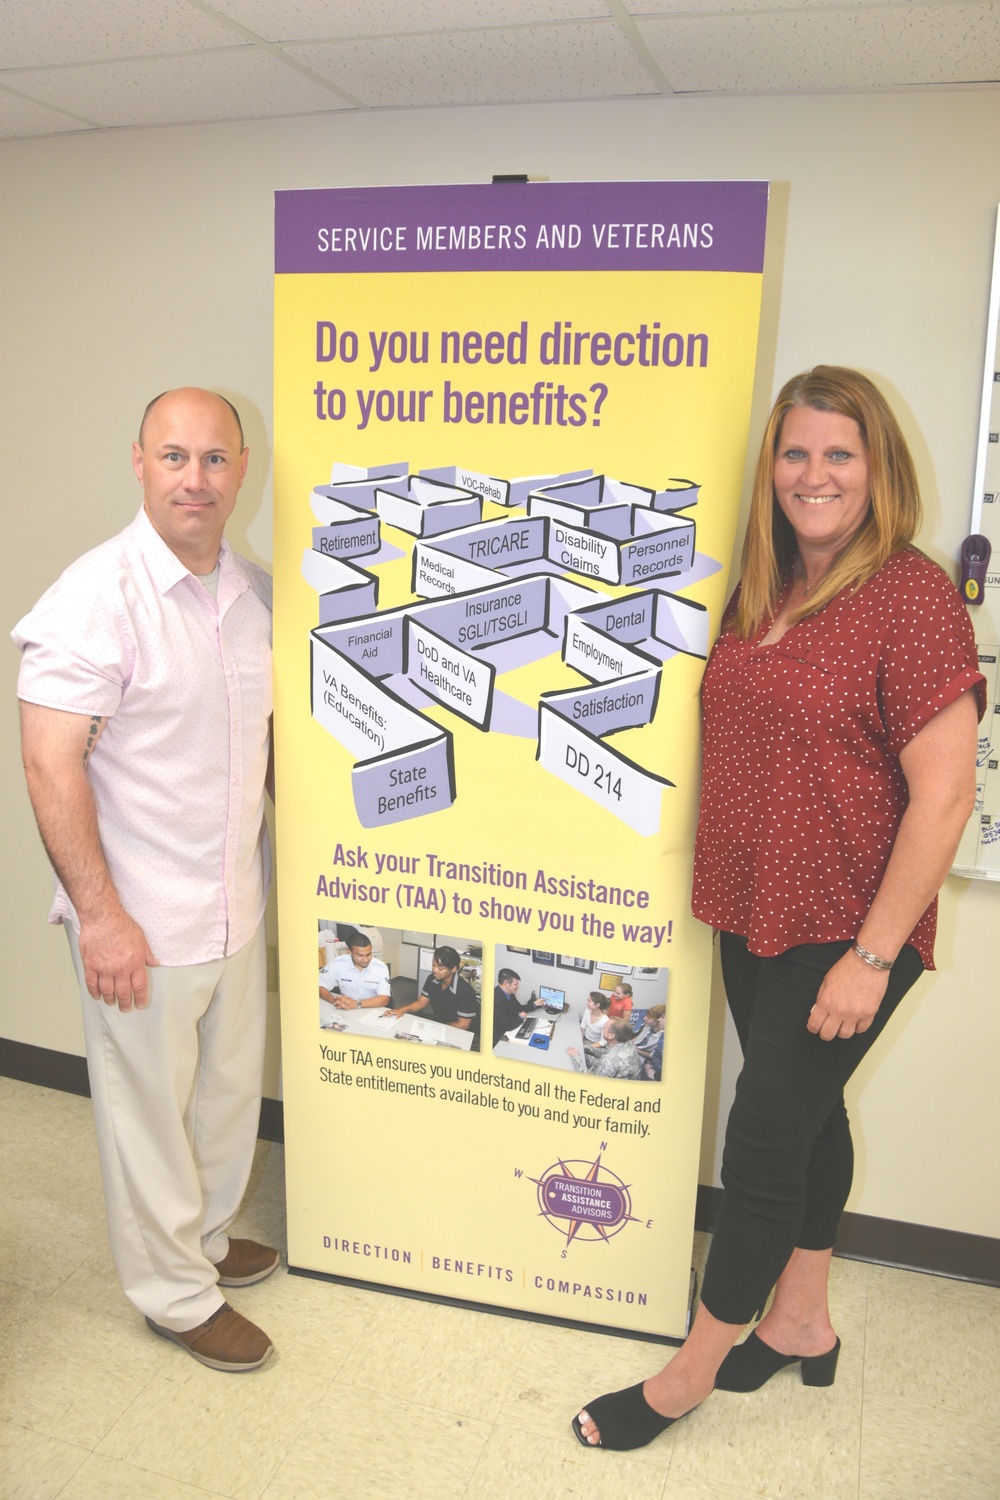 Transition Assistance Advisors assist transitioning service members